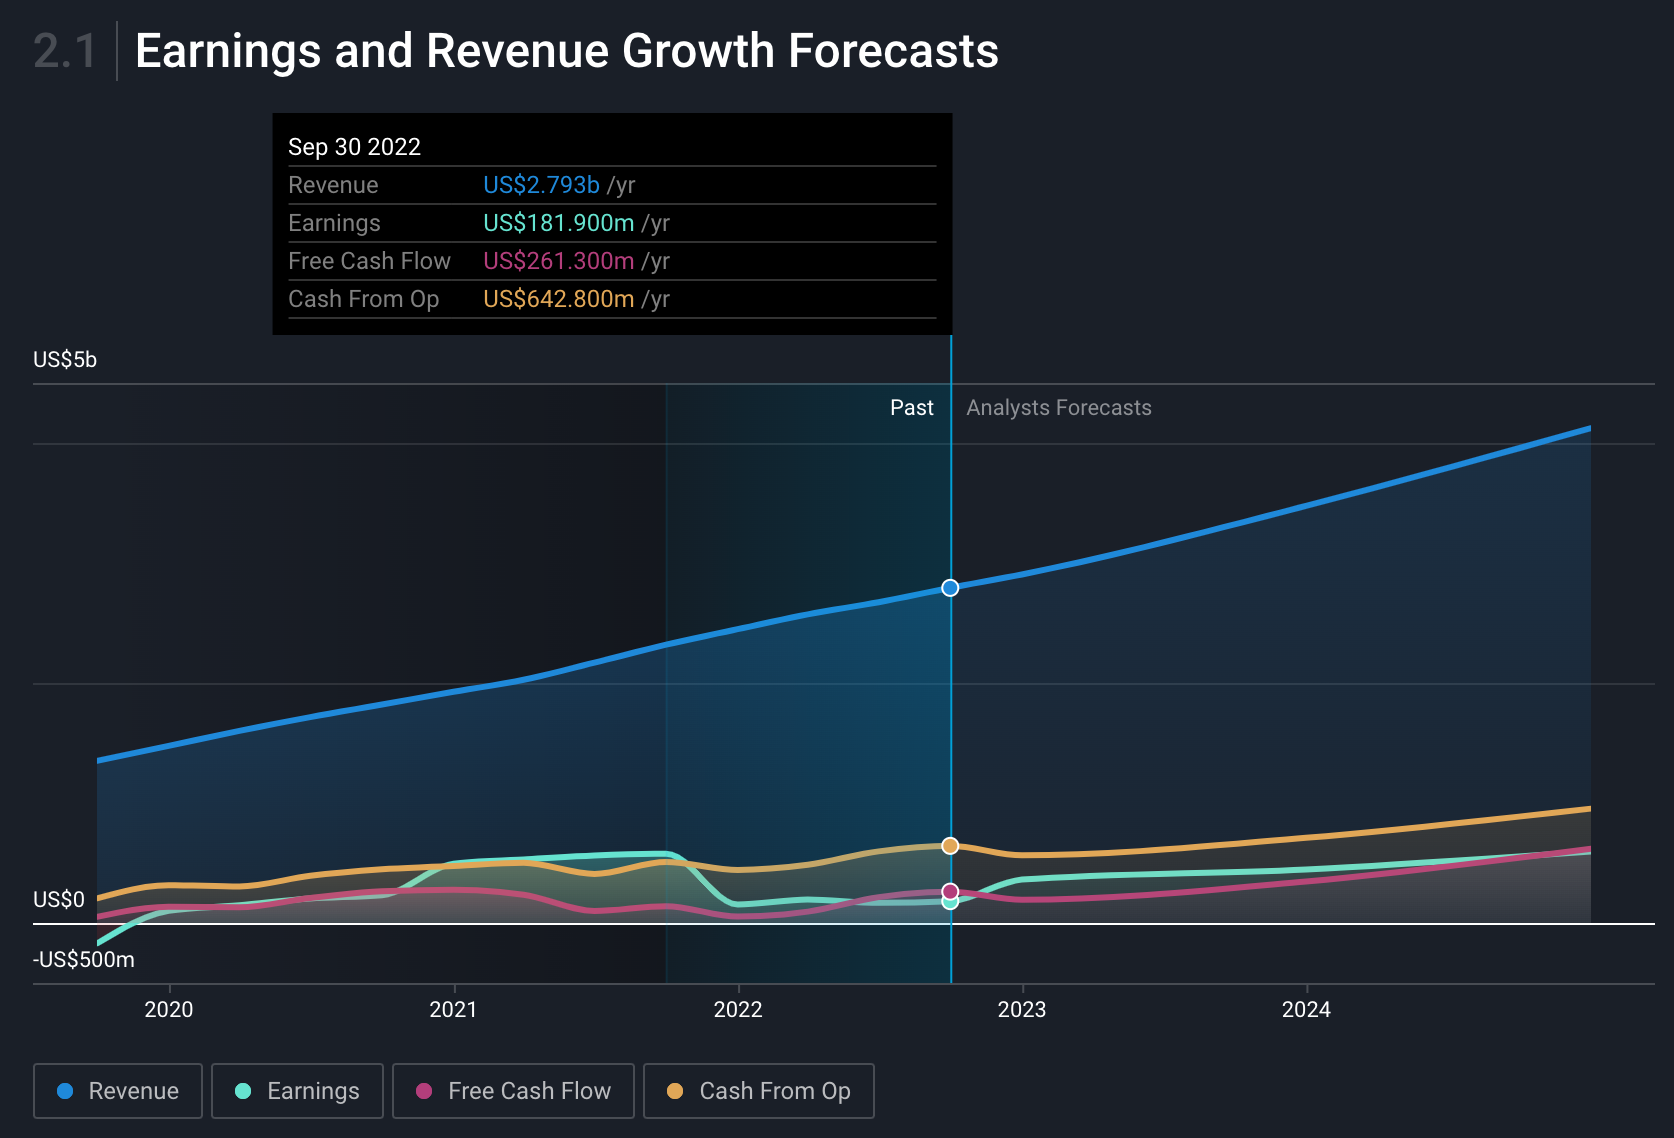 DexCom Earnings and revenue growth forecasts